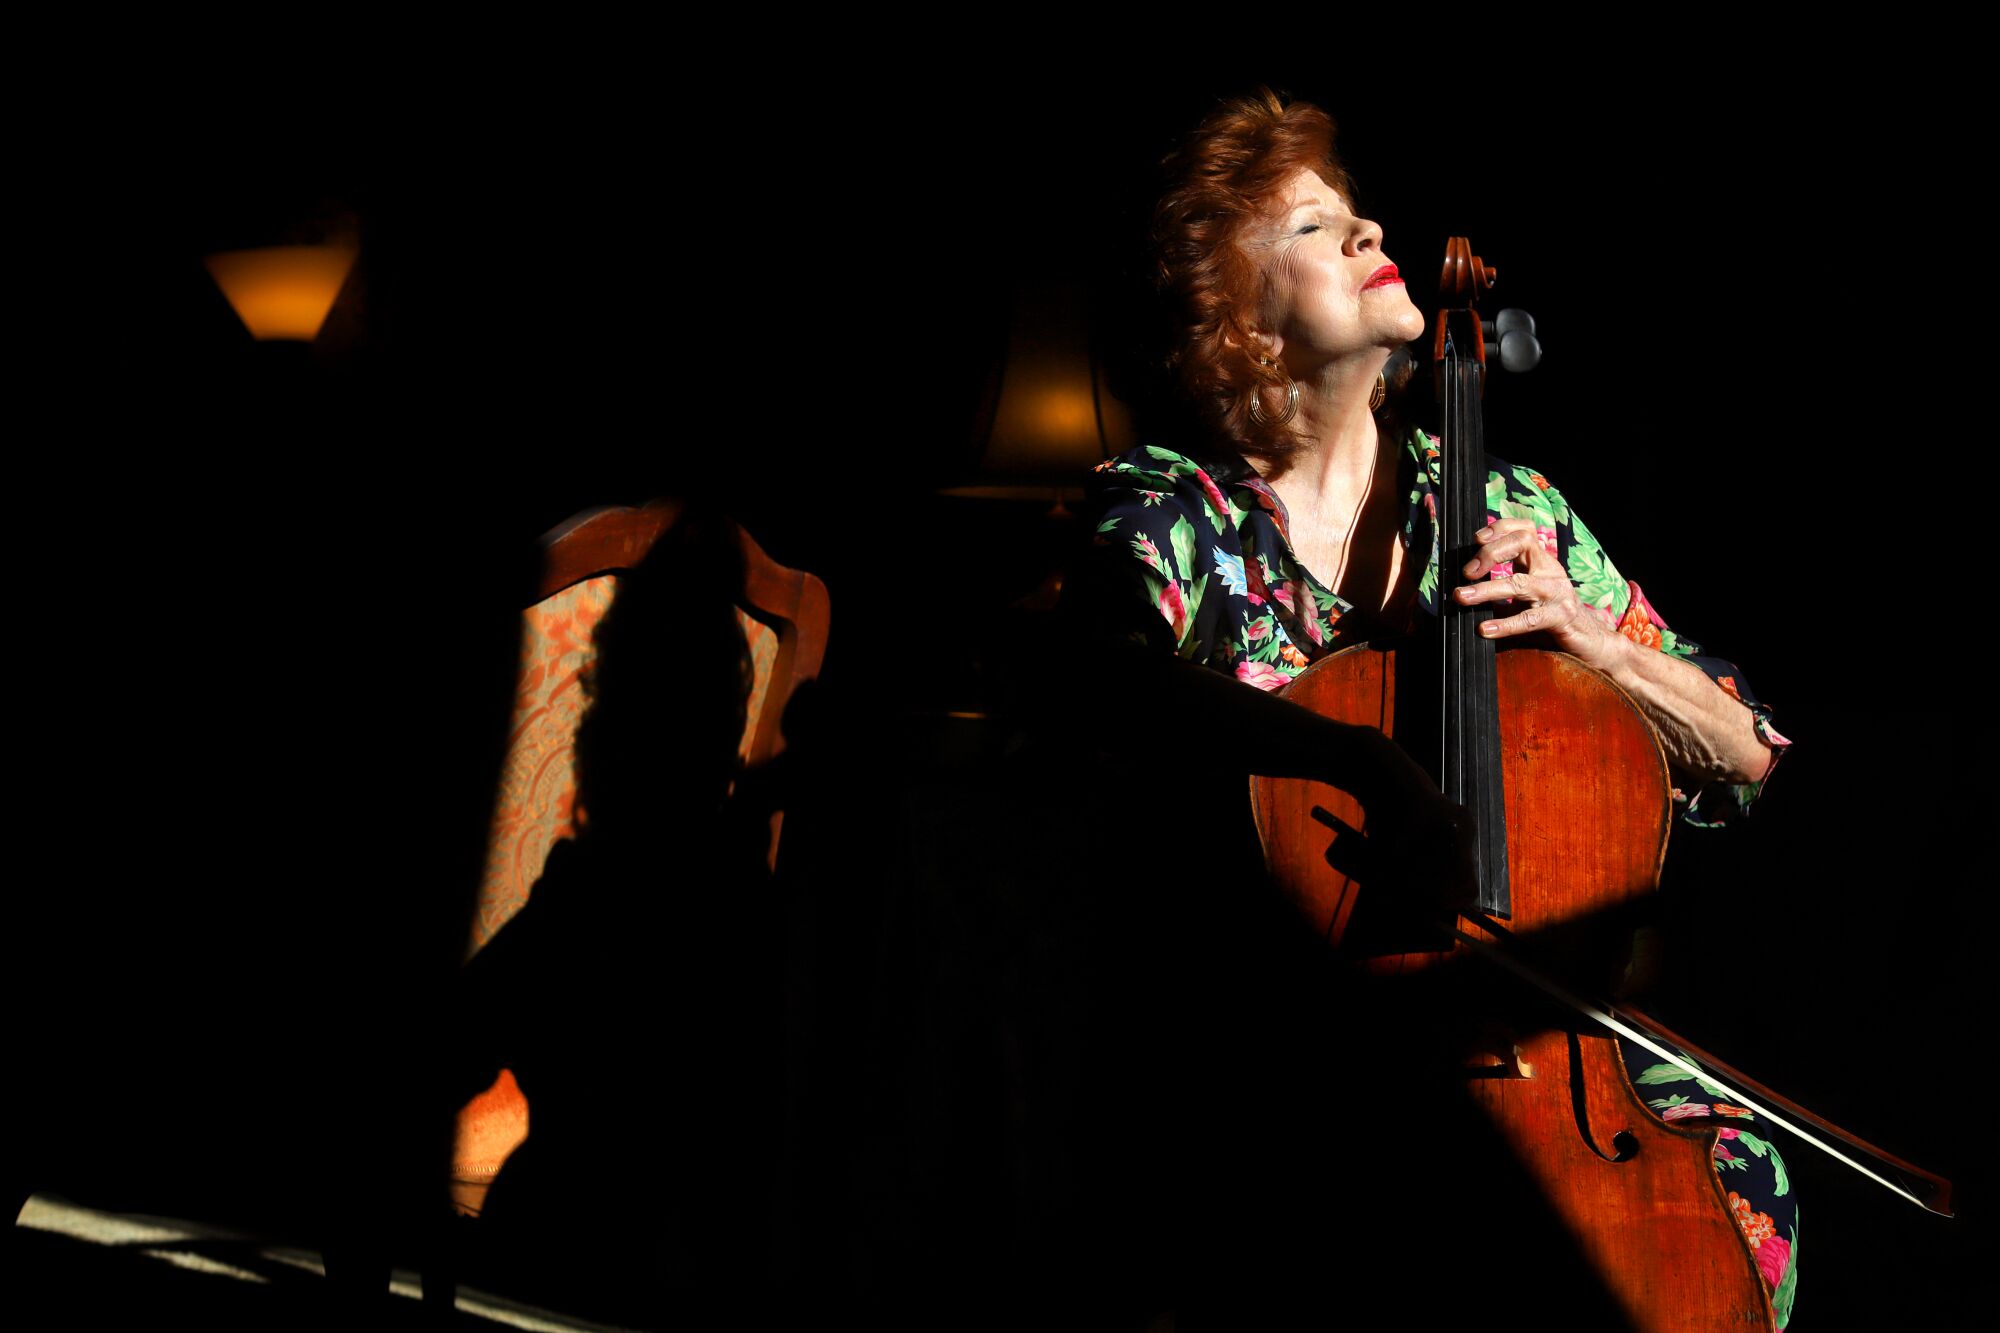 Christine Walevska, a master cellist, has played all over the world during her long career.